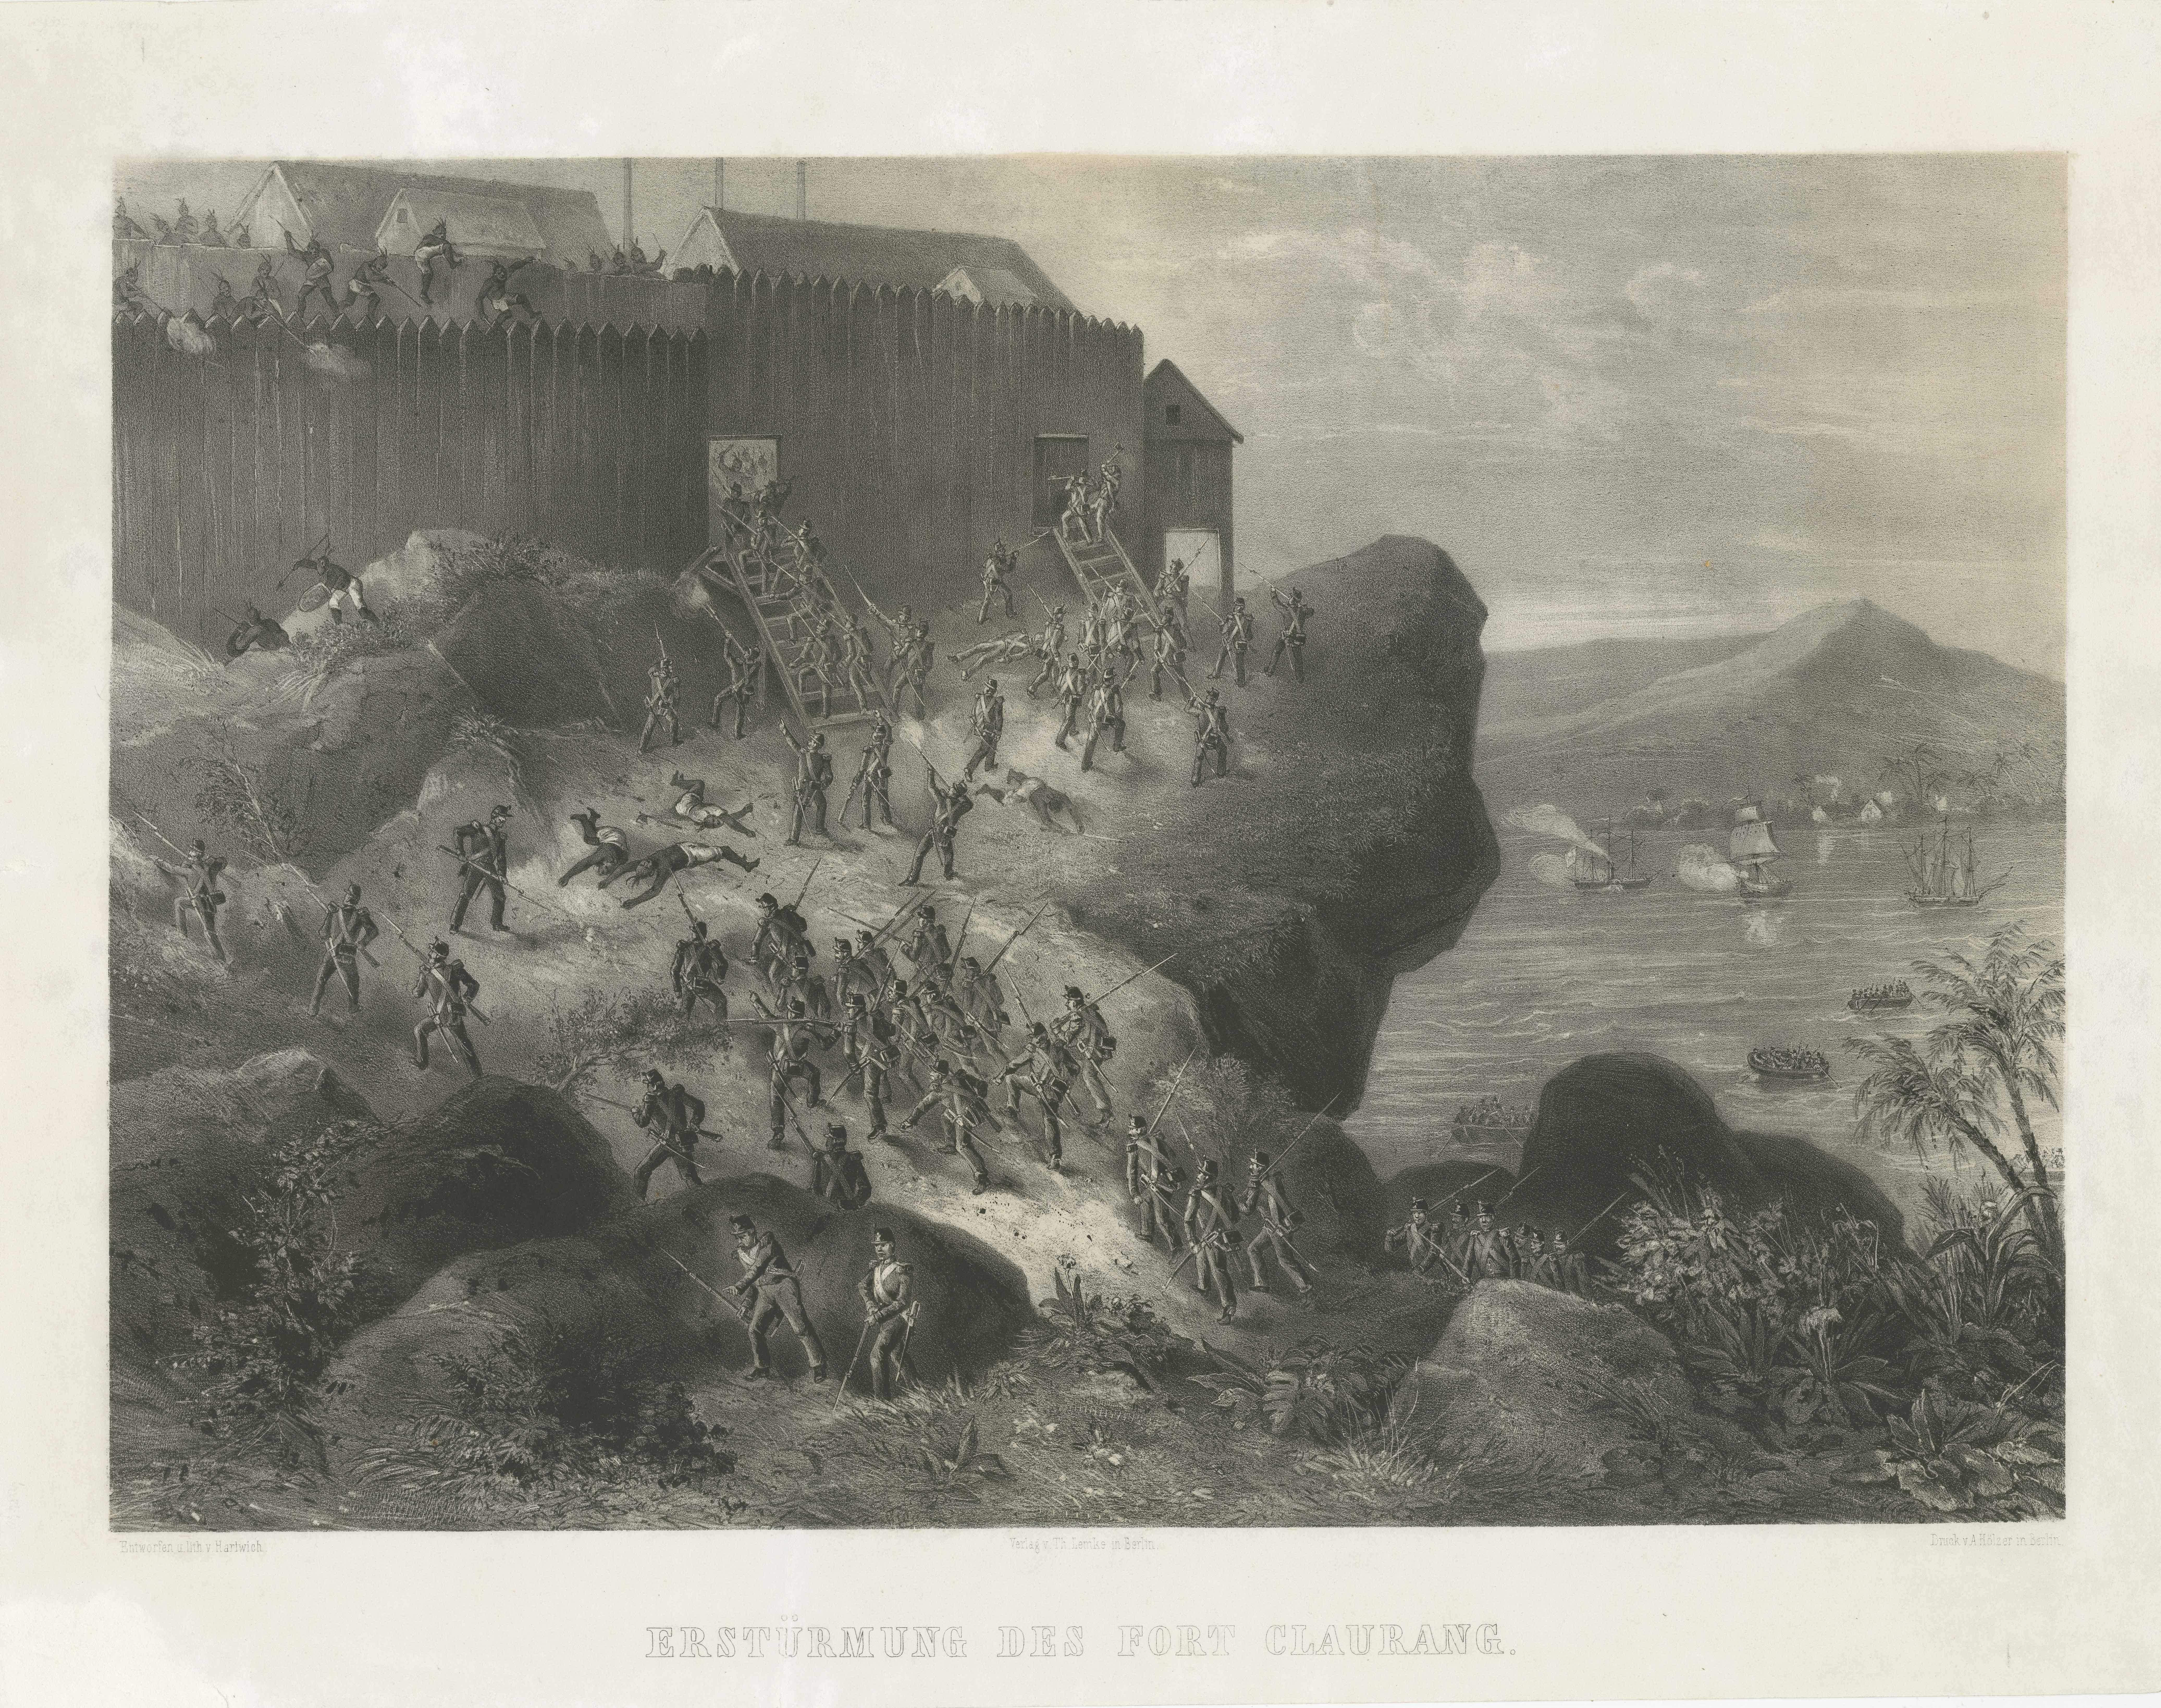 Incredible action view of a rare German lithograph showing a massive assault on Fort Claurang in Borneo. 

Published by Hartwich, A. Hölzer and TH. Lemke in Berlin around 1850.

Title in German: Erstürmung Des Fort Claurang.


